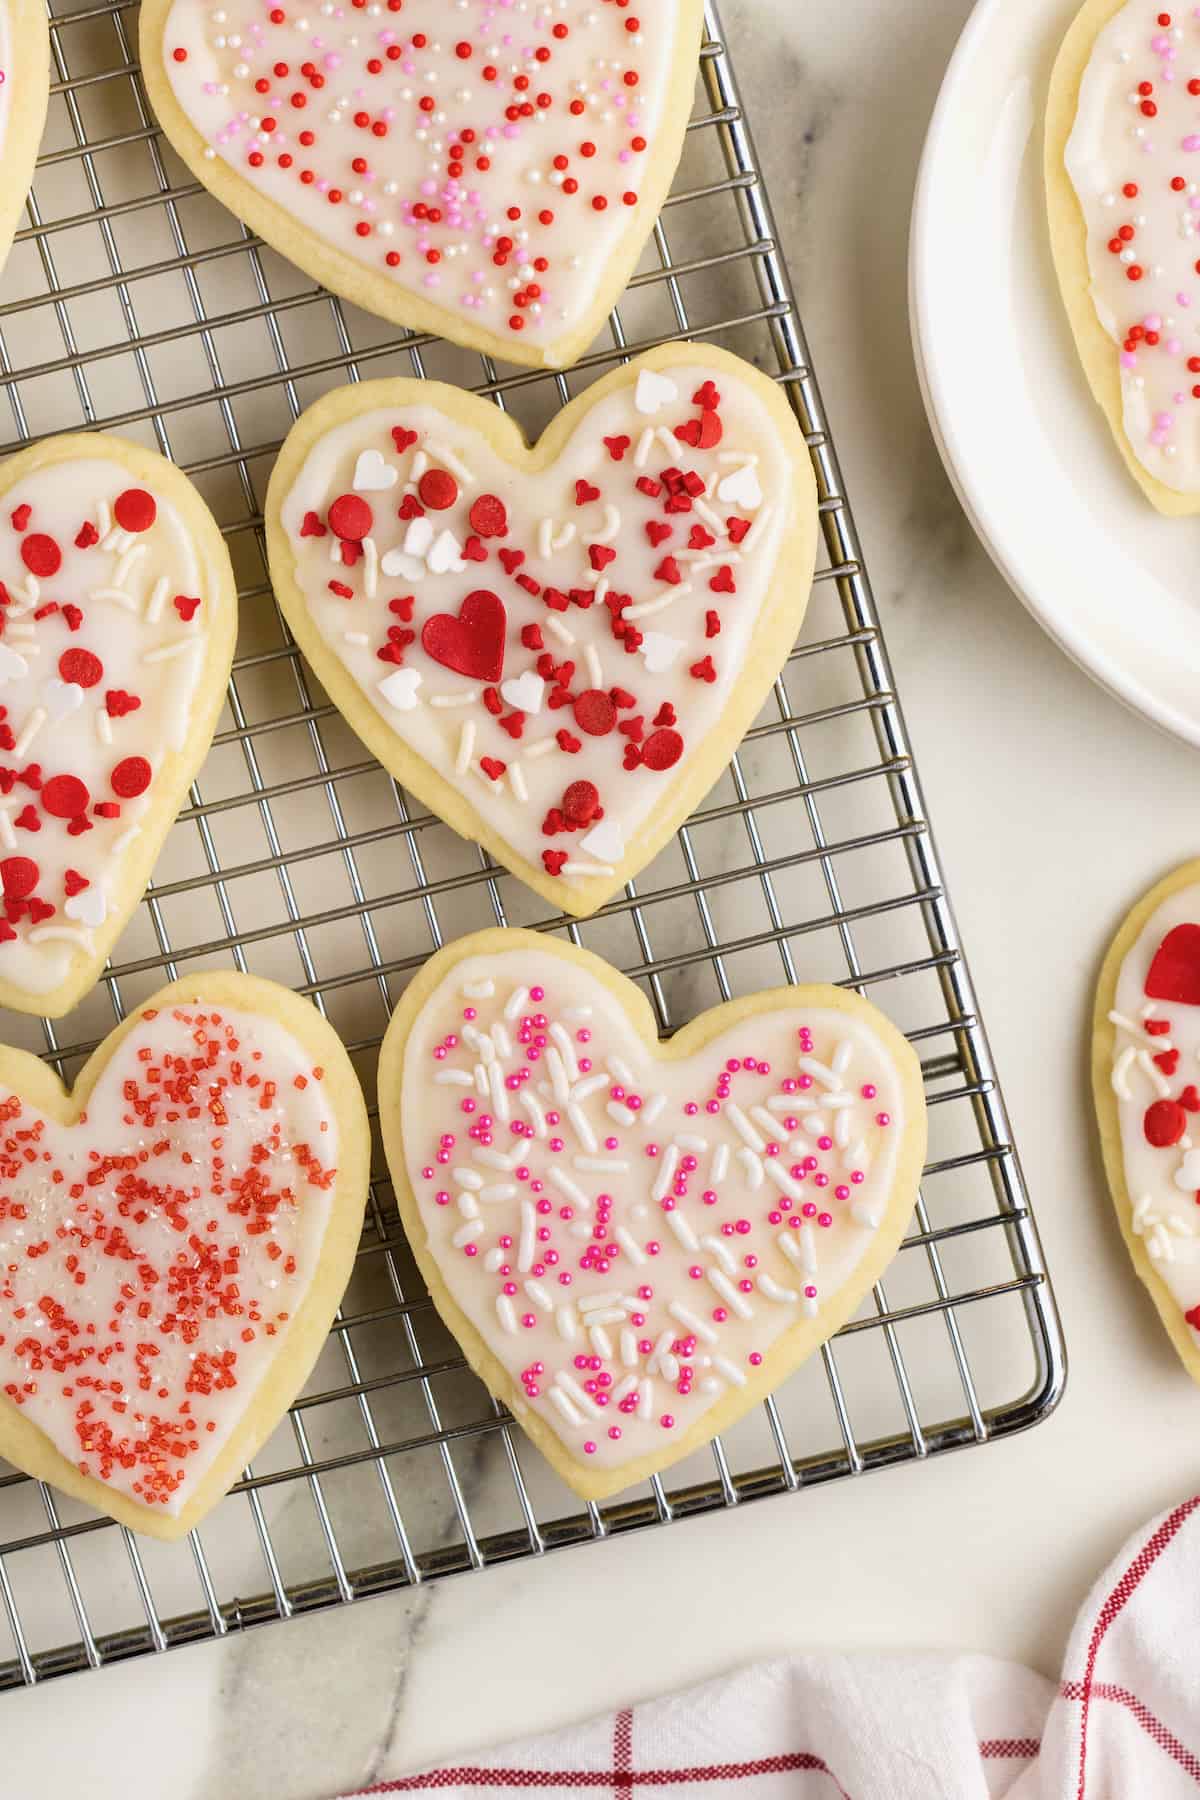 Heart shaped sugar cookies with white frosting and red and pink sprinkles on a wire cooling rack on a white marble counter.